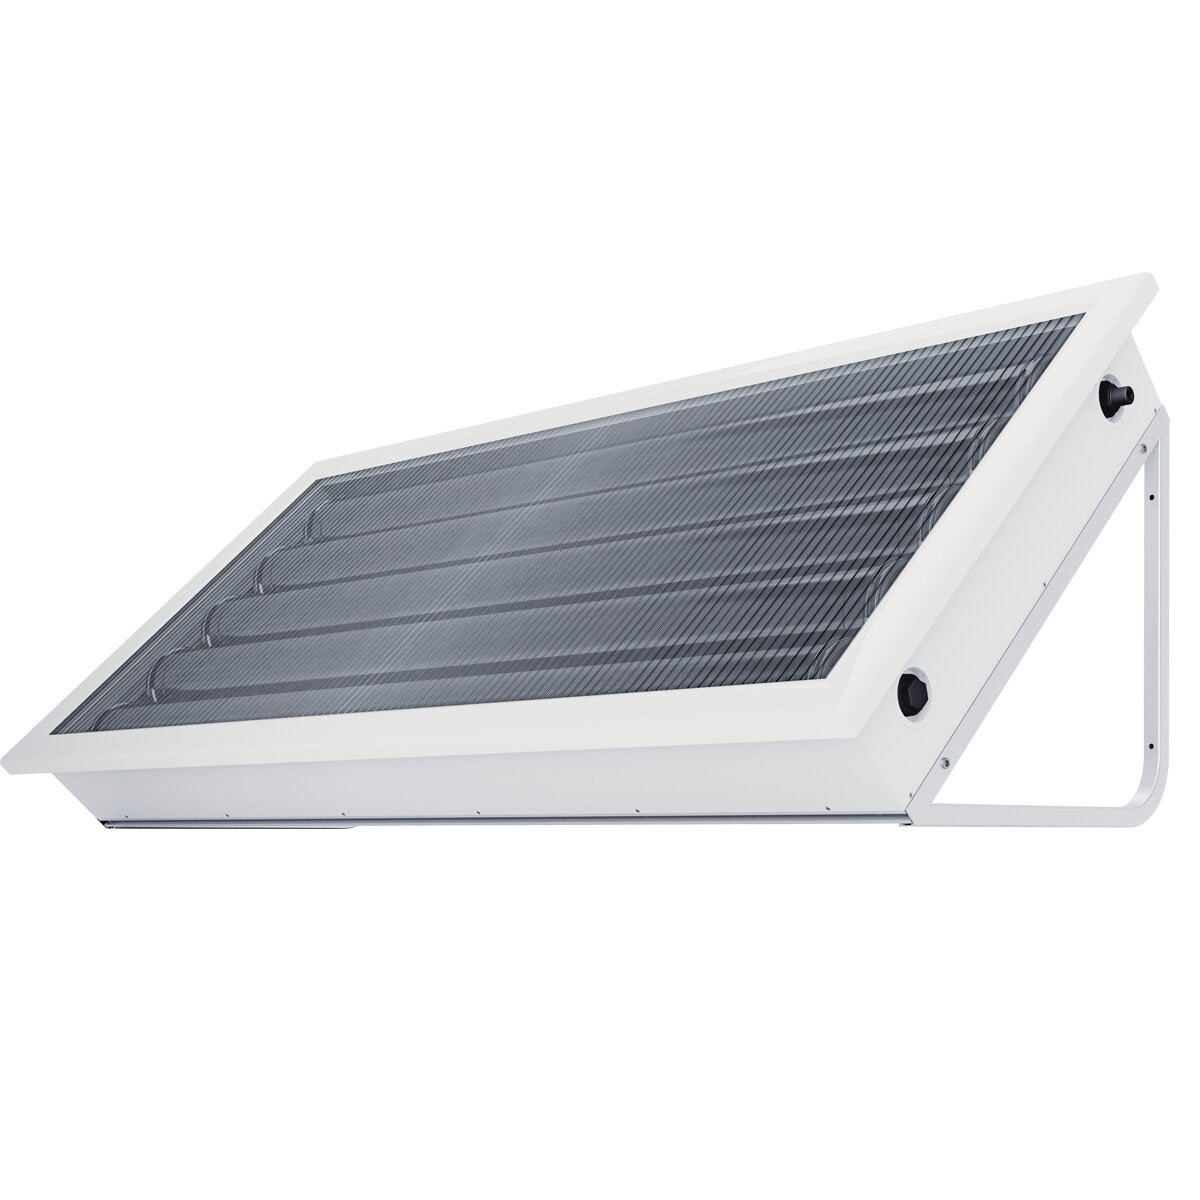 Pleion Ego 180 solar panel natural circulation white 175 liters flat and sloping roof